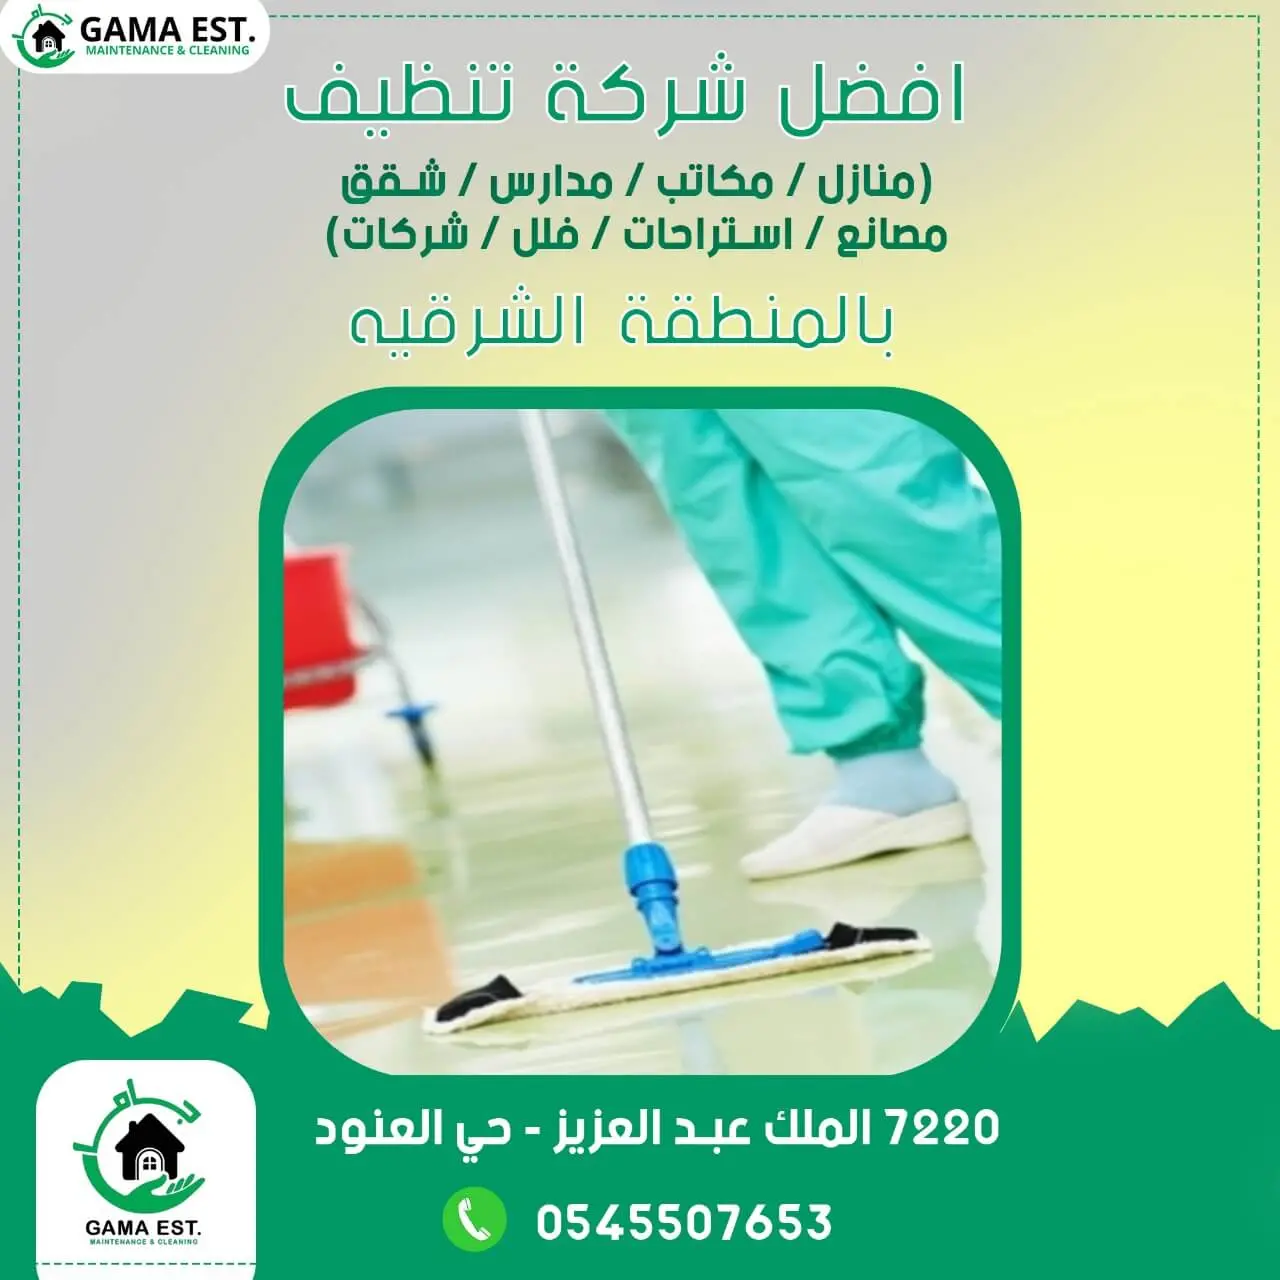 gama est for cleaning and sterilization in the eastern region